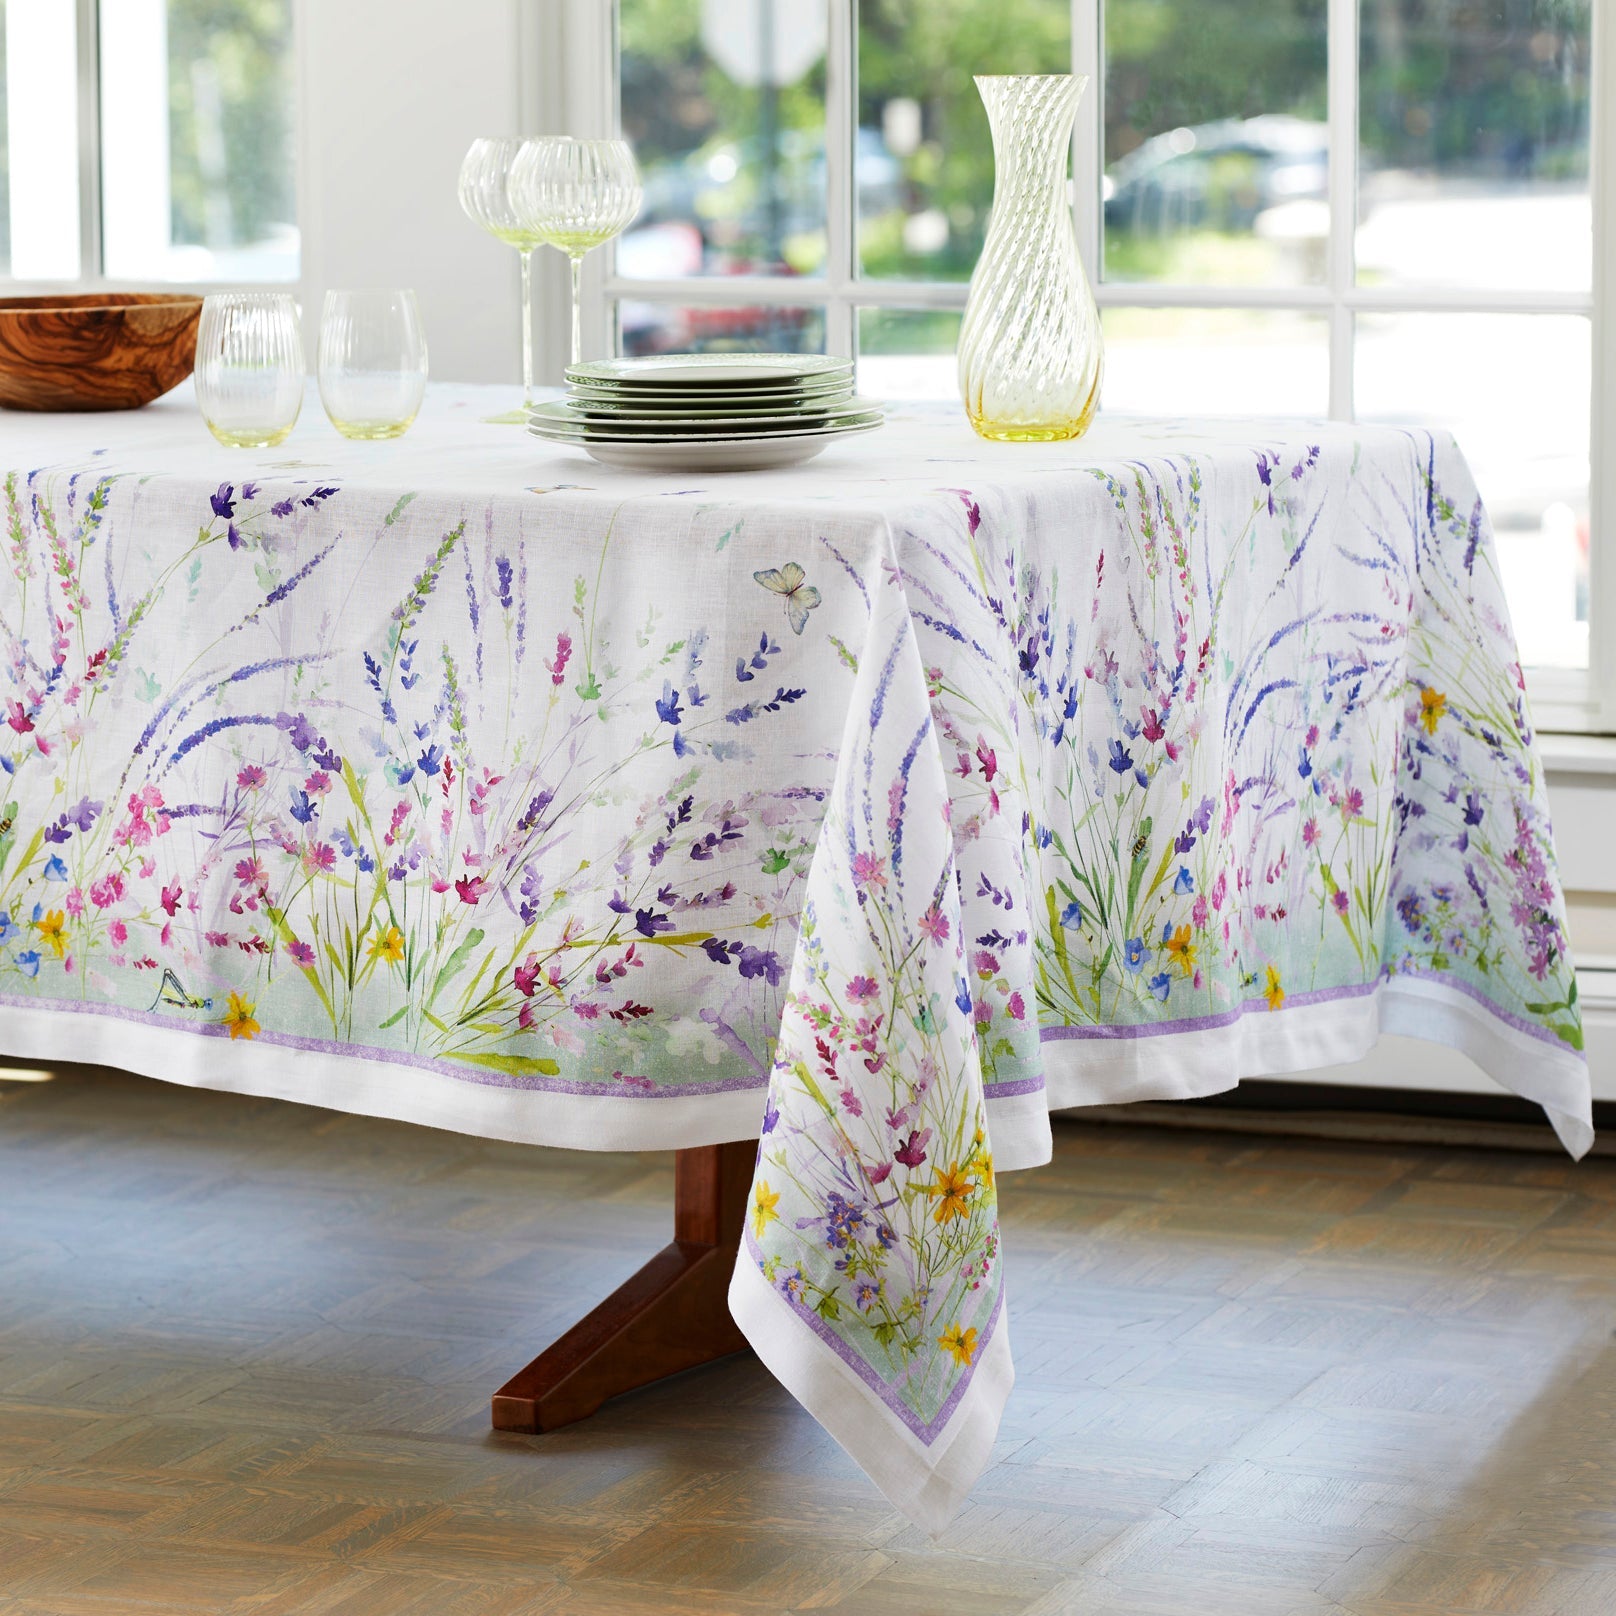 Meadow Tablecloth in 67" x 106" size features hand-painted floral watercolors in shades of blue, purple and green on Italian linen, from Caskata